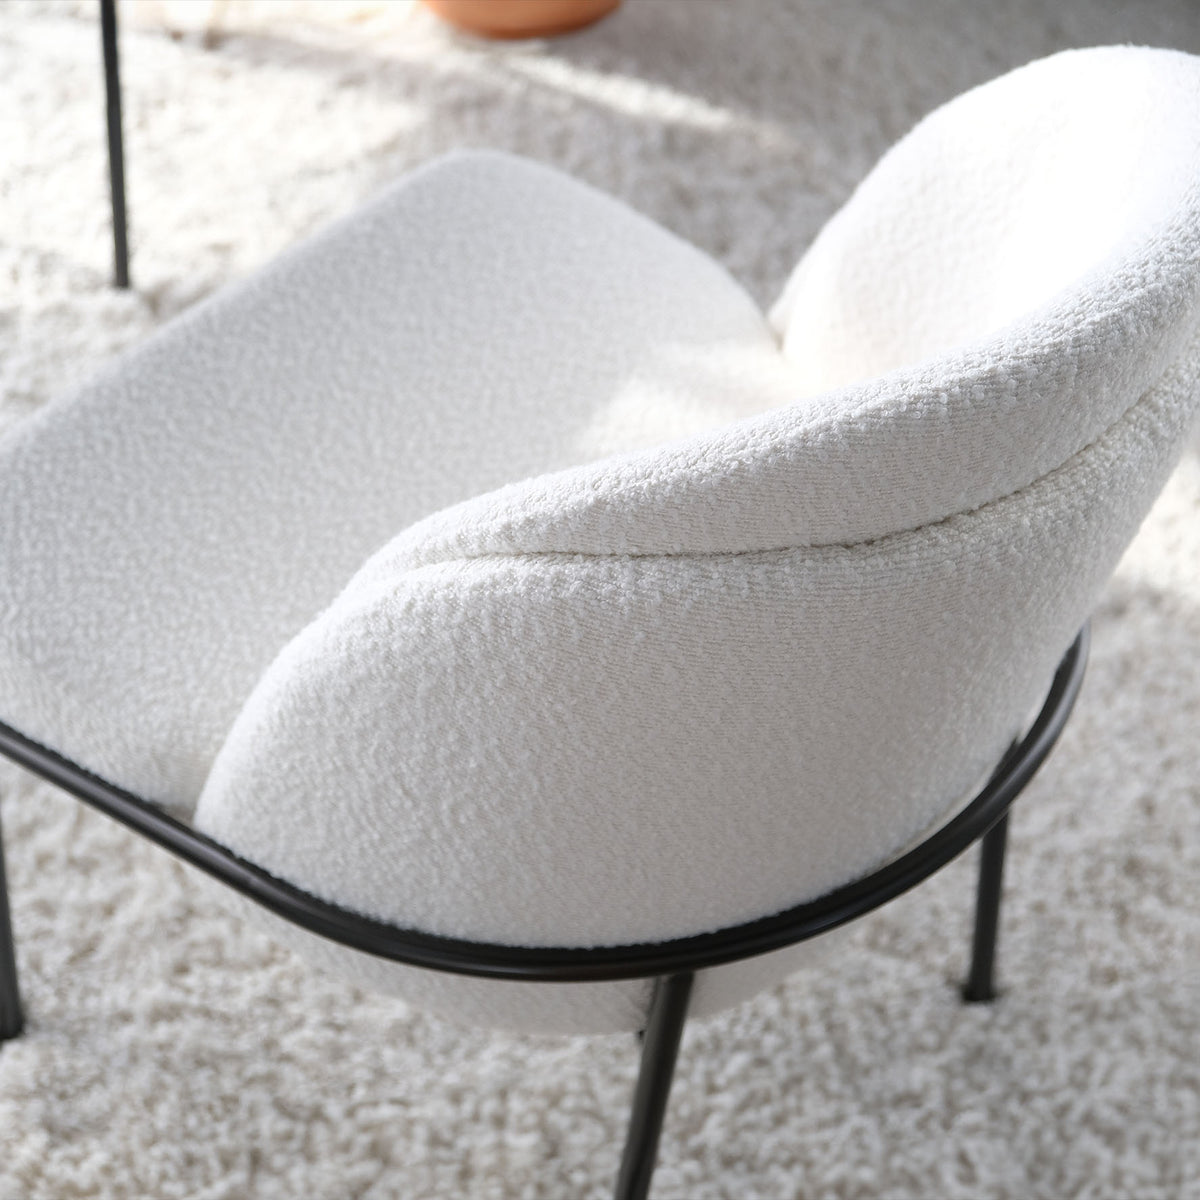 Top view of a modern boucle dining chair, highlighting its stylish design and textured upholstery.